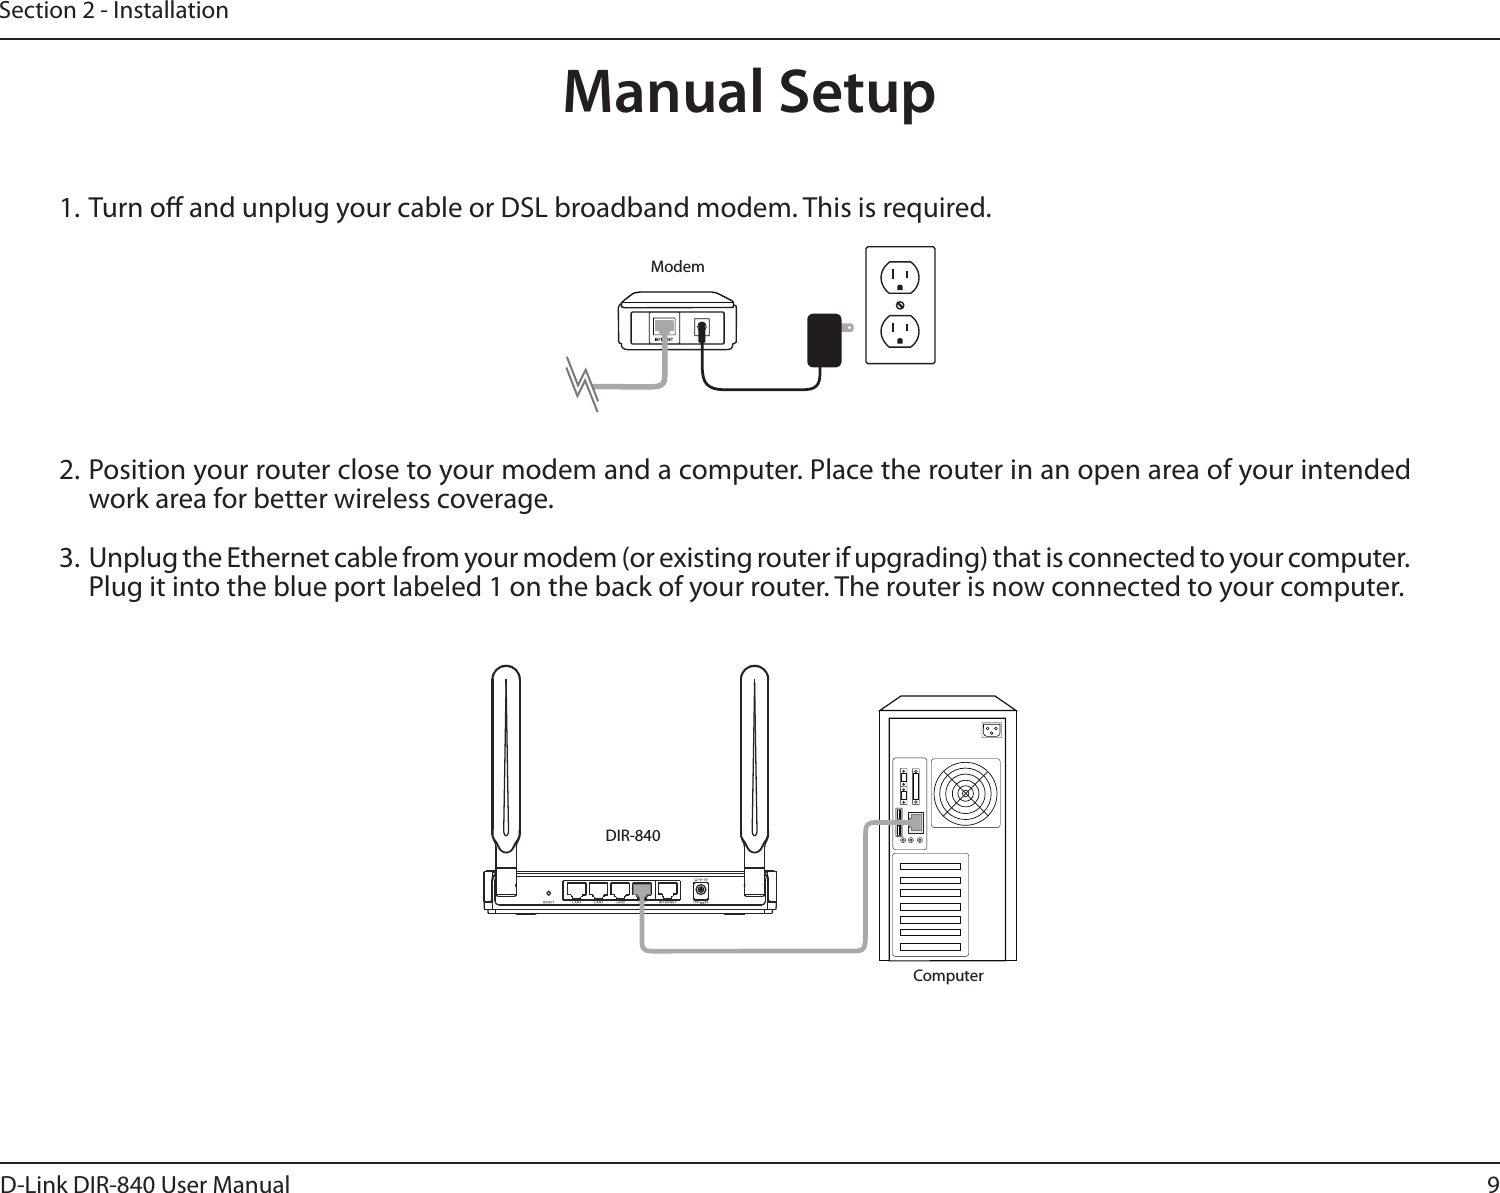 9D-Link DIR-840 User ManualSection 2 - Installation1. Turn o and unplug your cable or DSL broadband modem. This is required.Manual Setup2. Position your router close to your modem and a computer. Place the router in an open area of your intended work area for better wireless coverage.3. Unplug the Ethernet cable from your modem (or existing router if upgrading) that is connected to your computer. Plug it into the blue port labeled 1 on the back of your router. The router is now connected to your computer.ModemDIR-840Computer